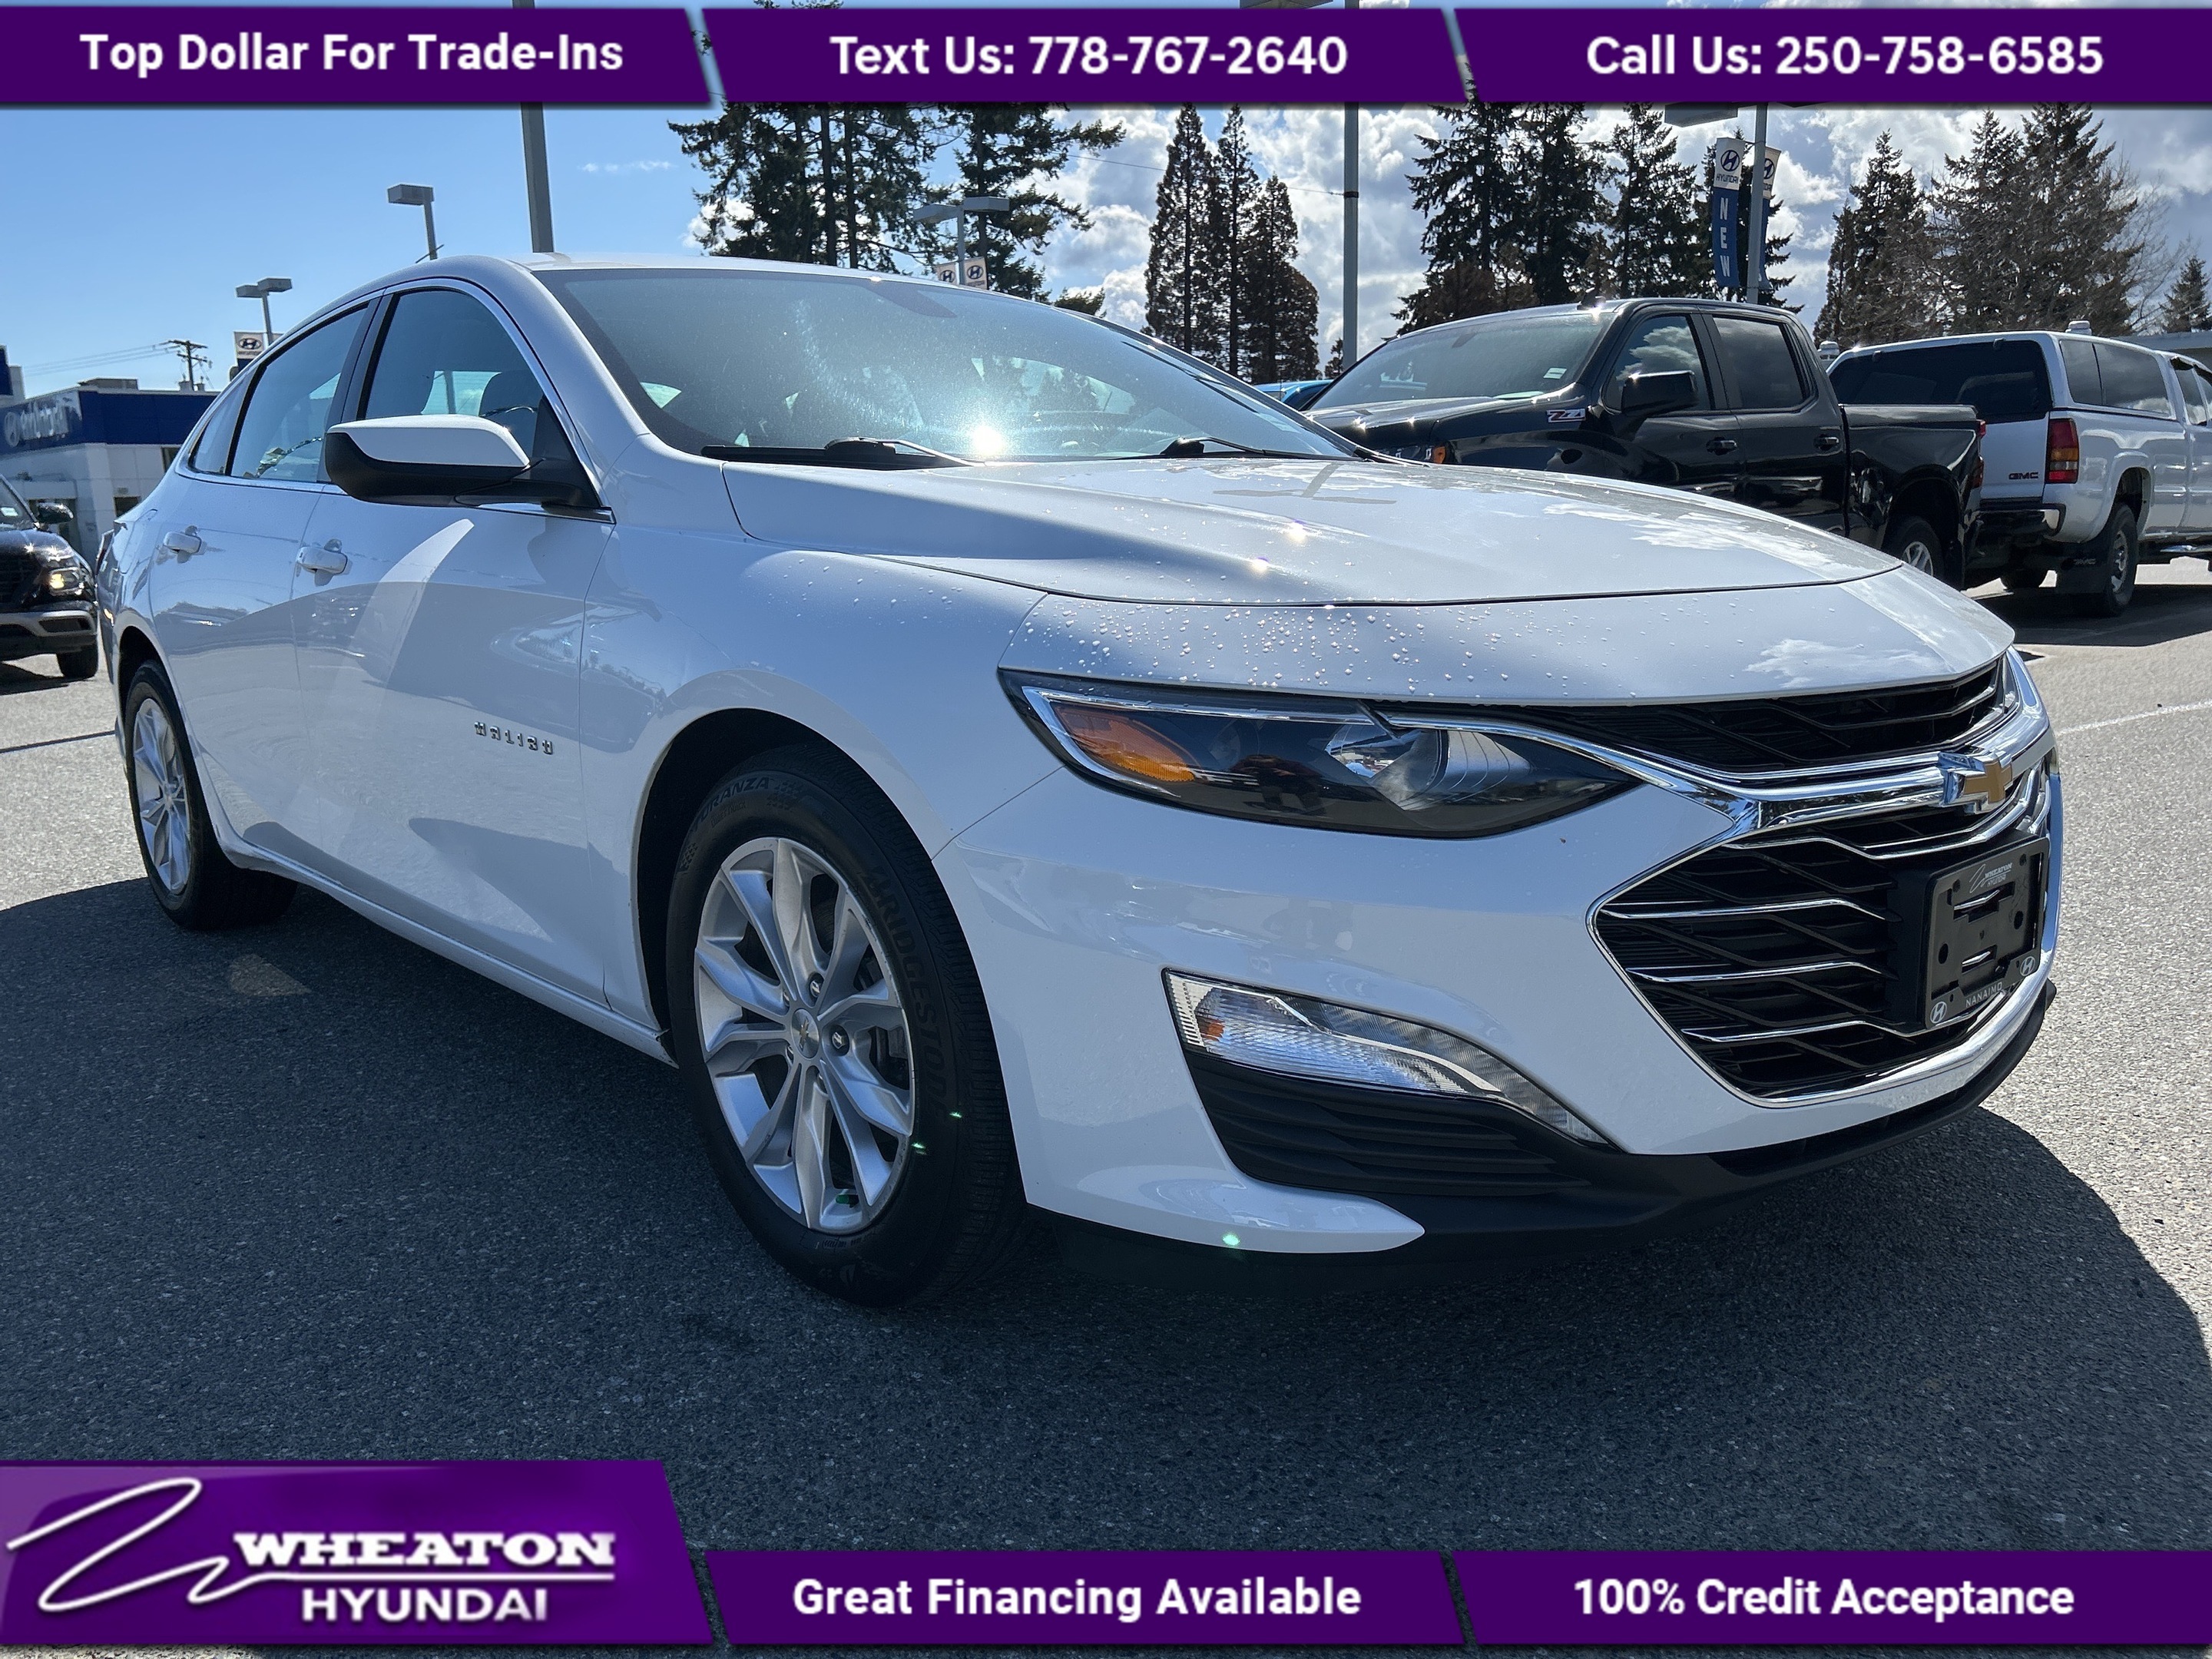 2019 Chevrolet Malibu LT, Trade in, Heated Seats, Touch Screen, Back Up 